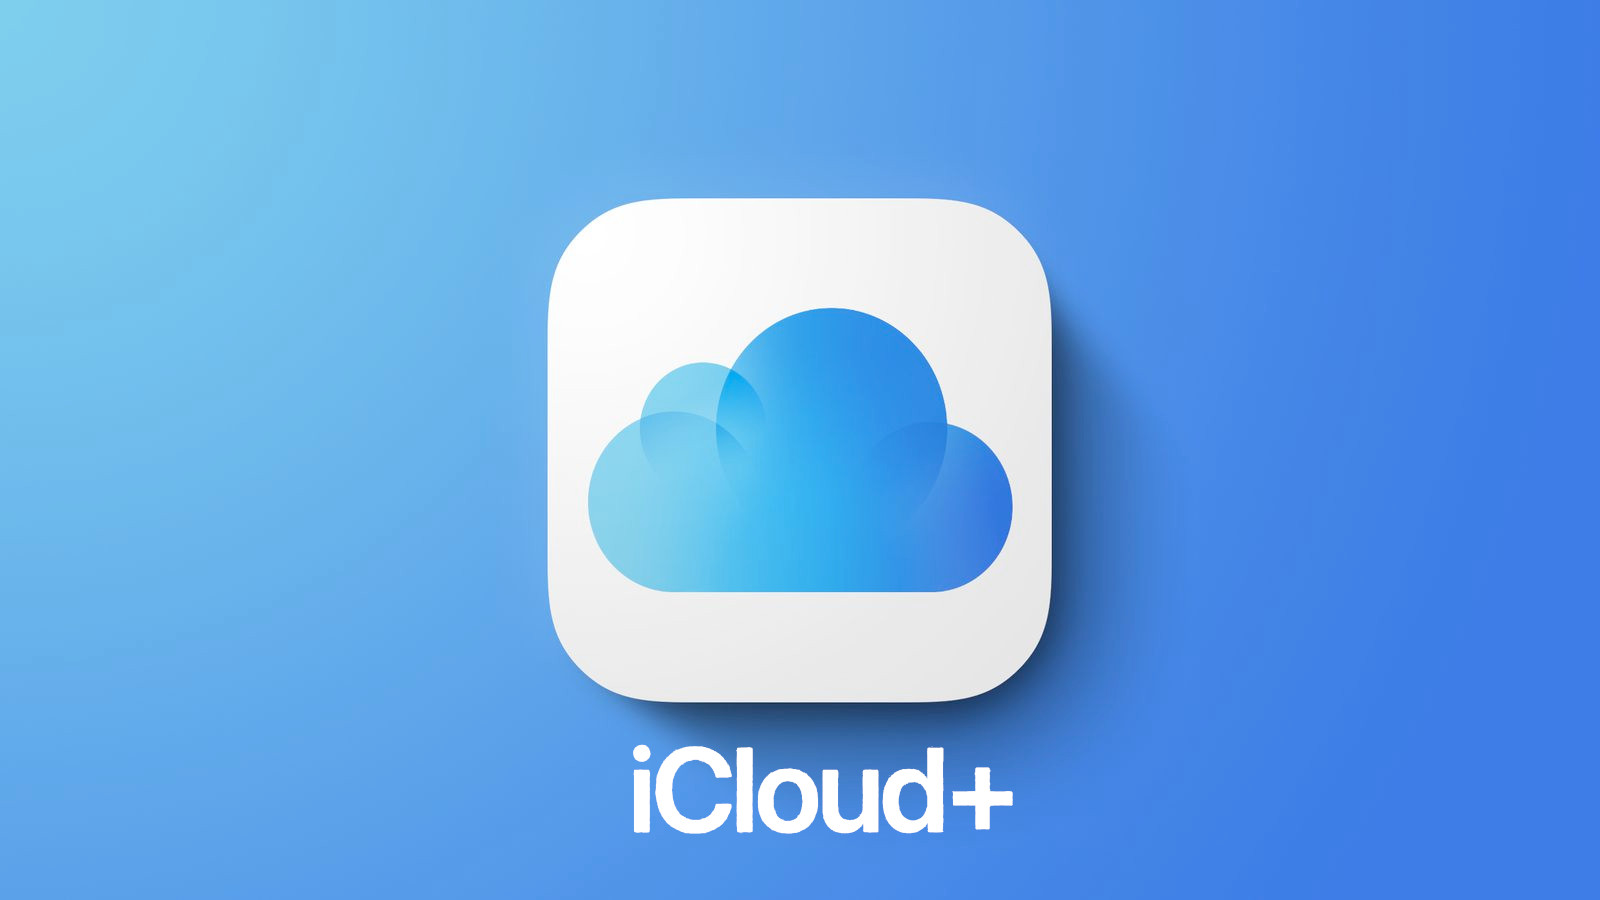 iCloud+ 50GB - 3 Months Trial Subscription US (ONLY FOR NEW ACCOUNTS) $0.31